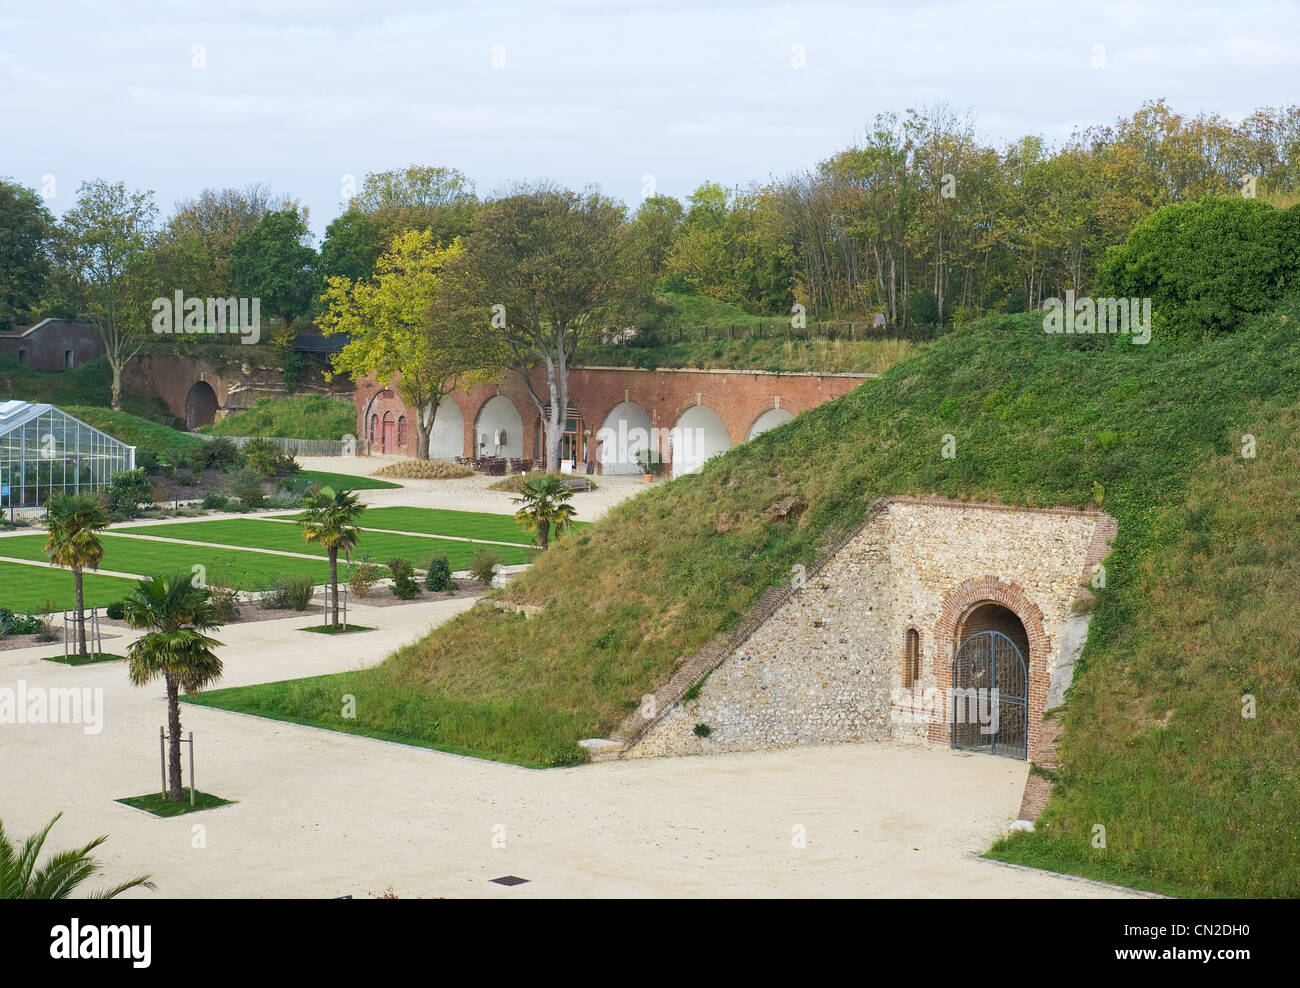 The Jardins Suspendus, hanging gardens of Le Havre, were set up in the reconverted Fort Sainte-Adresse, Normandy,France Stock Photo